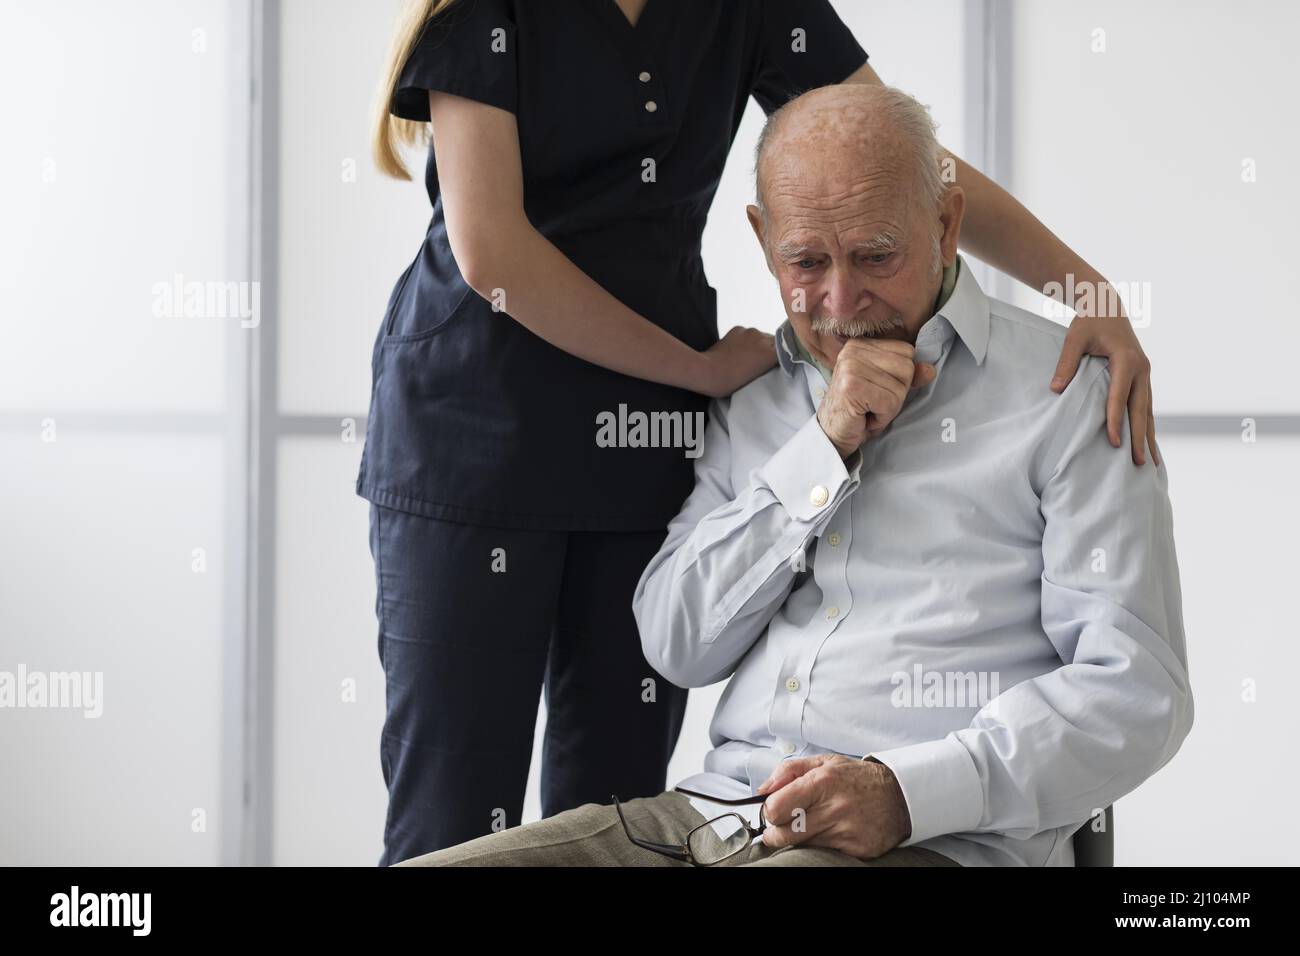 Nurse consoling old crying man Stock Photo